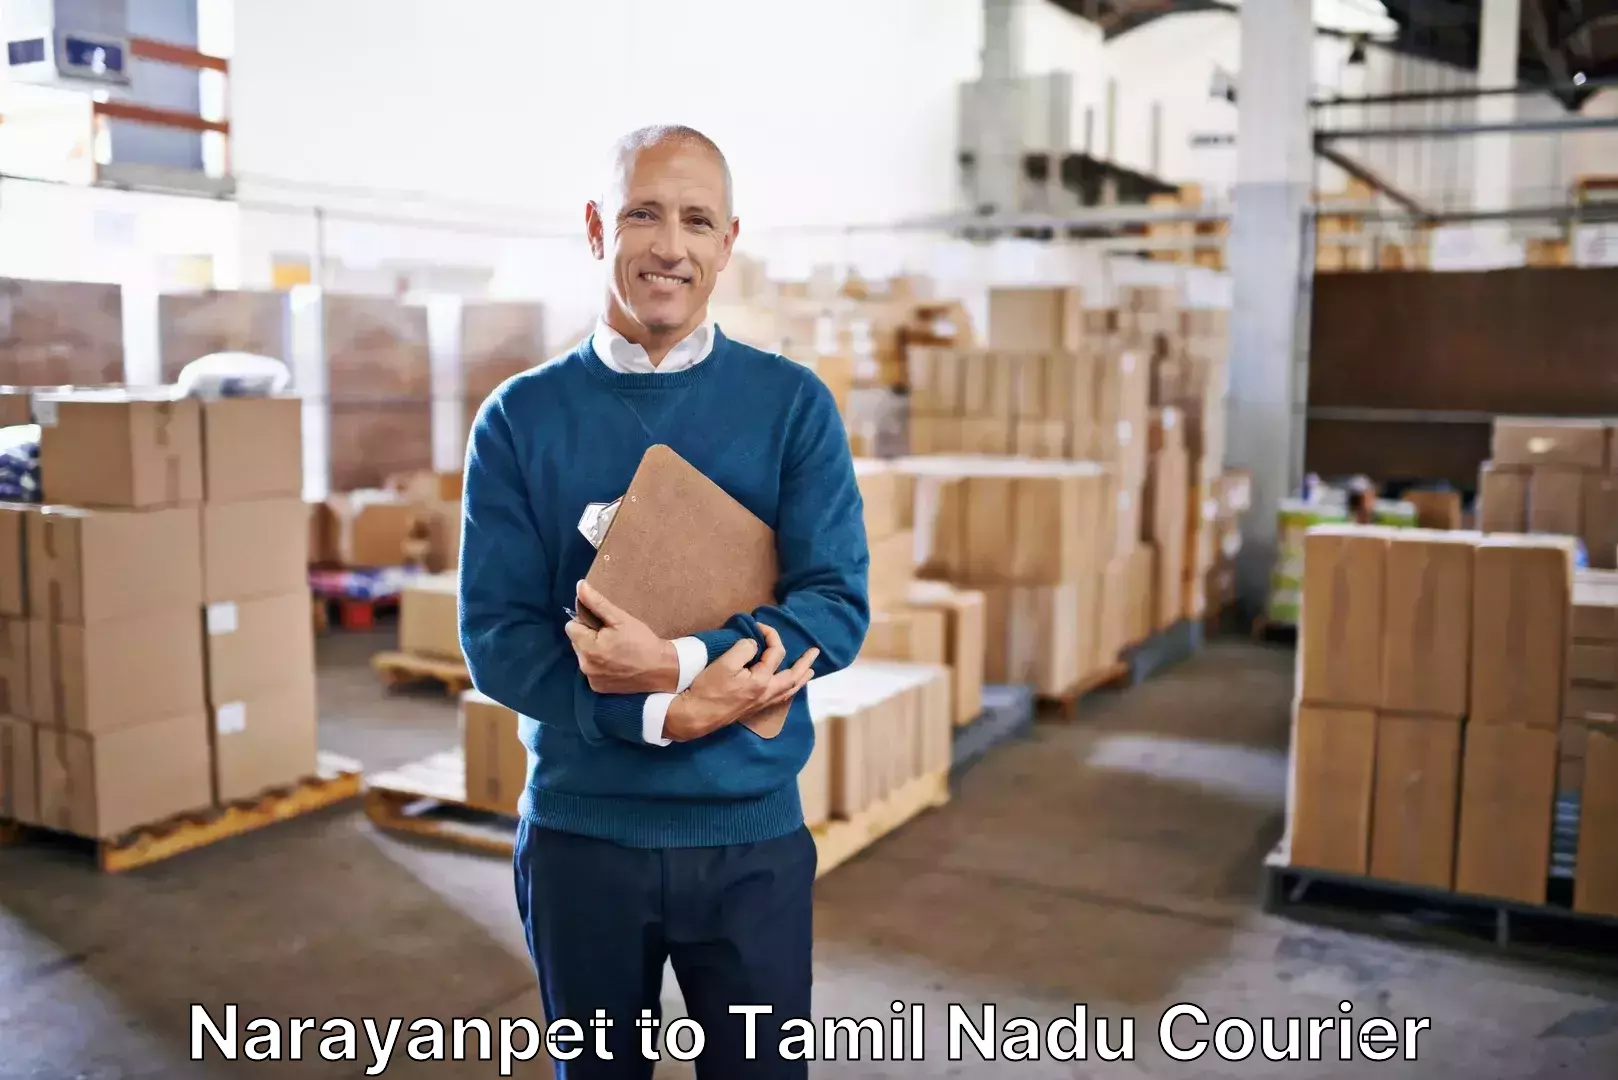 Luggage delivery app Narayanpet to Madurai